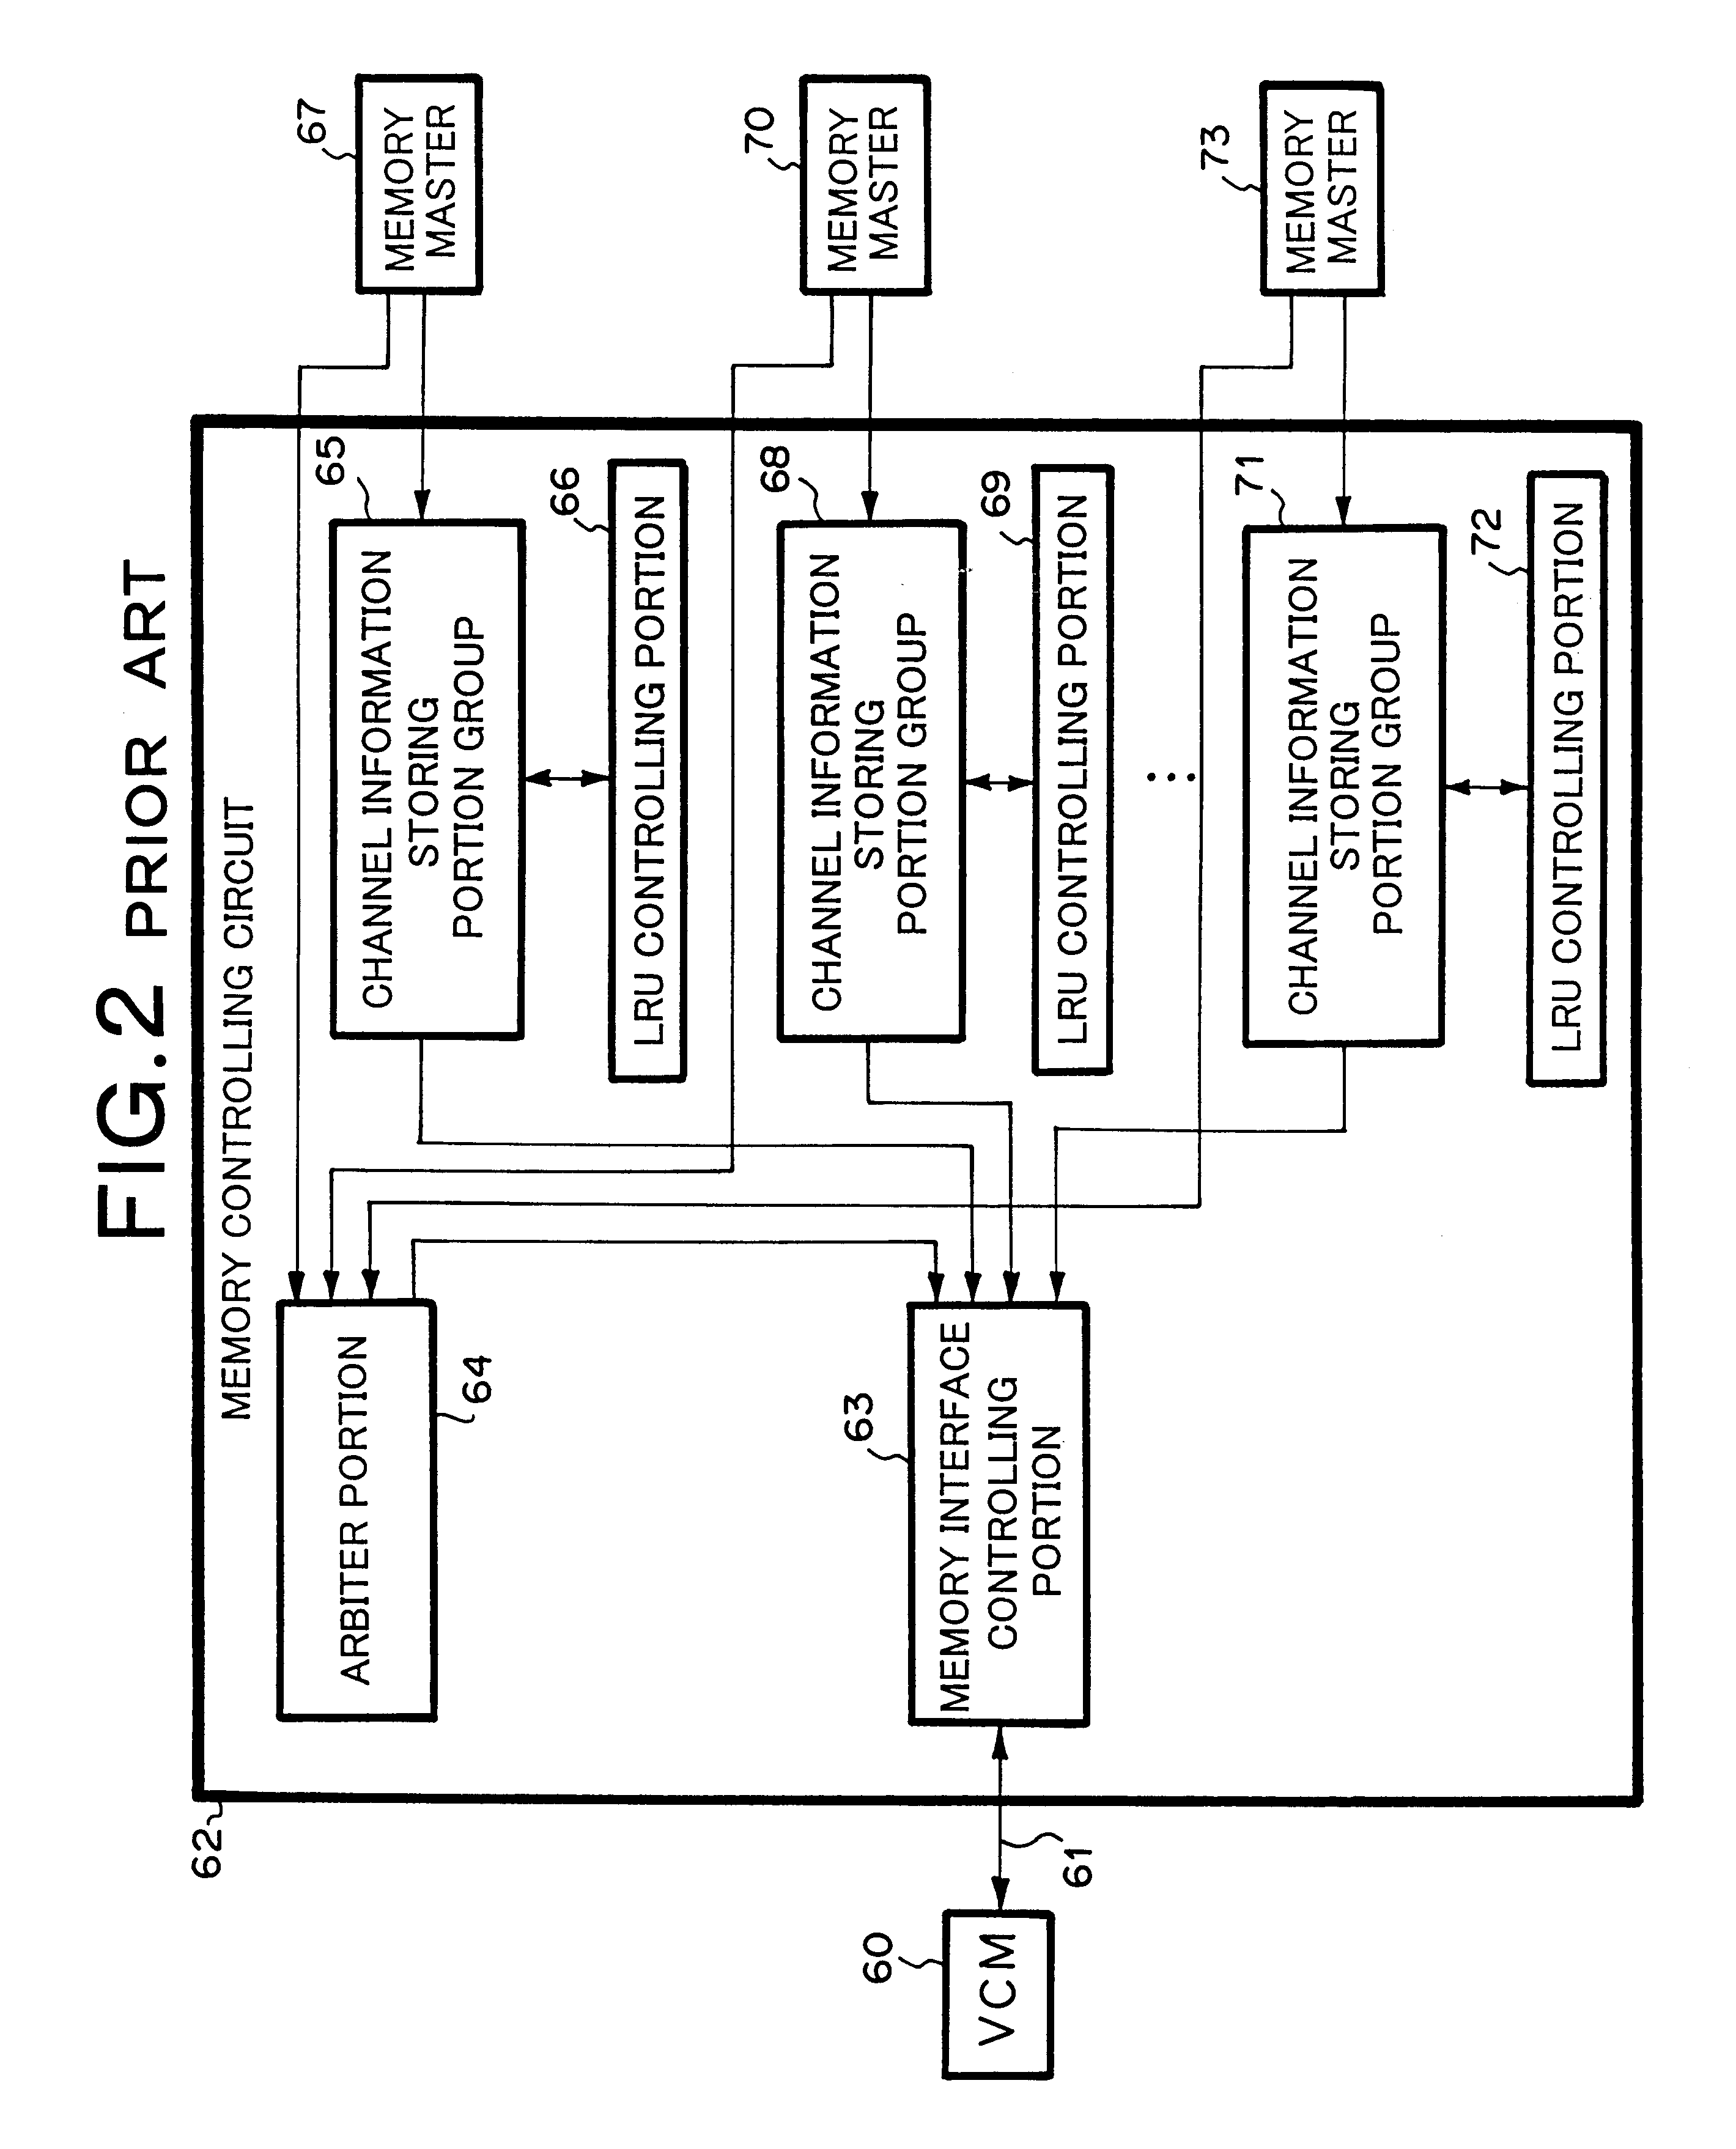 Virtual channel memory access controlling circuit